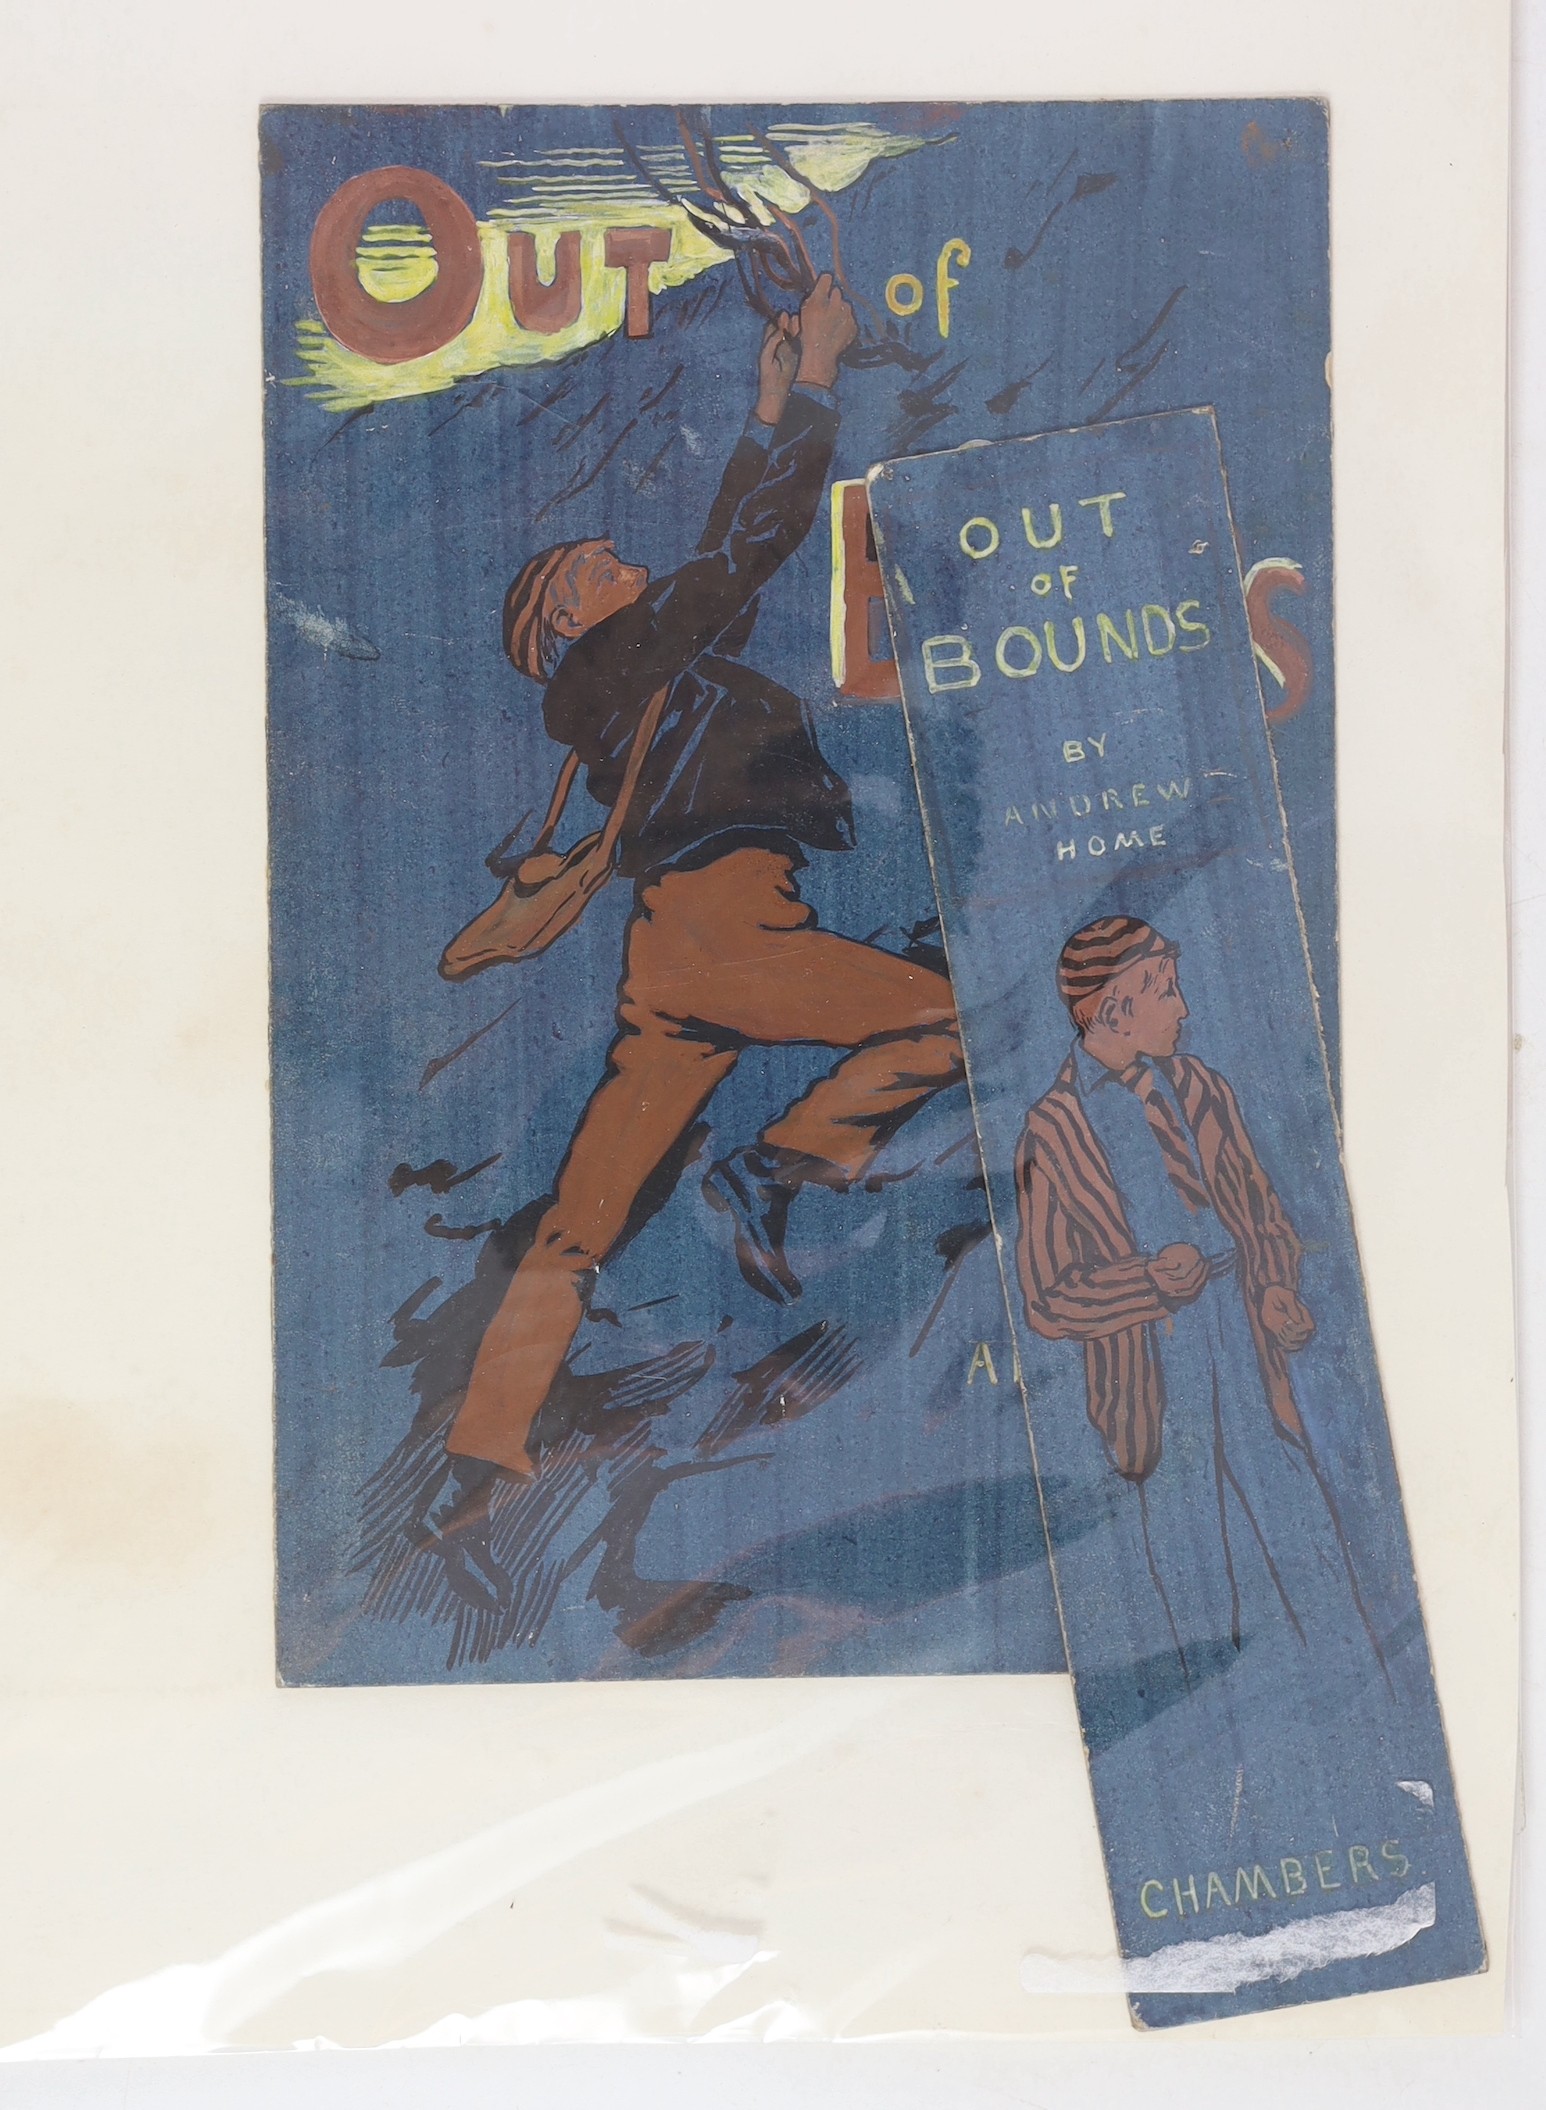 Original Artwork - Harold Copping (1863-1932), original artwork for the front cover and spine of - Out of Bounds, by Andrew Hone, together with the book, 1901